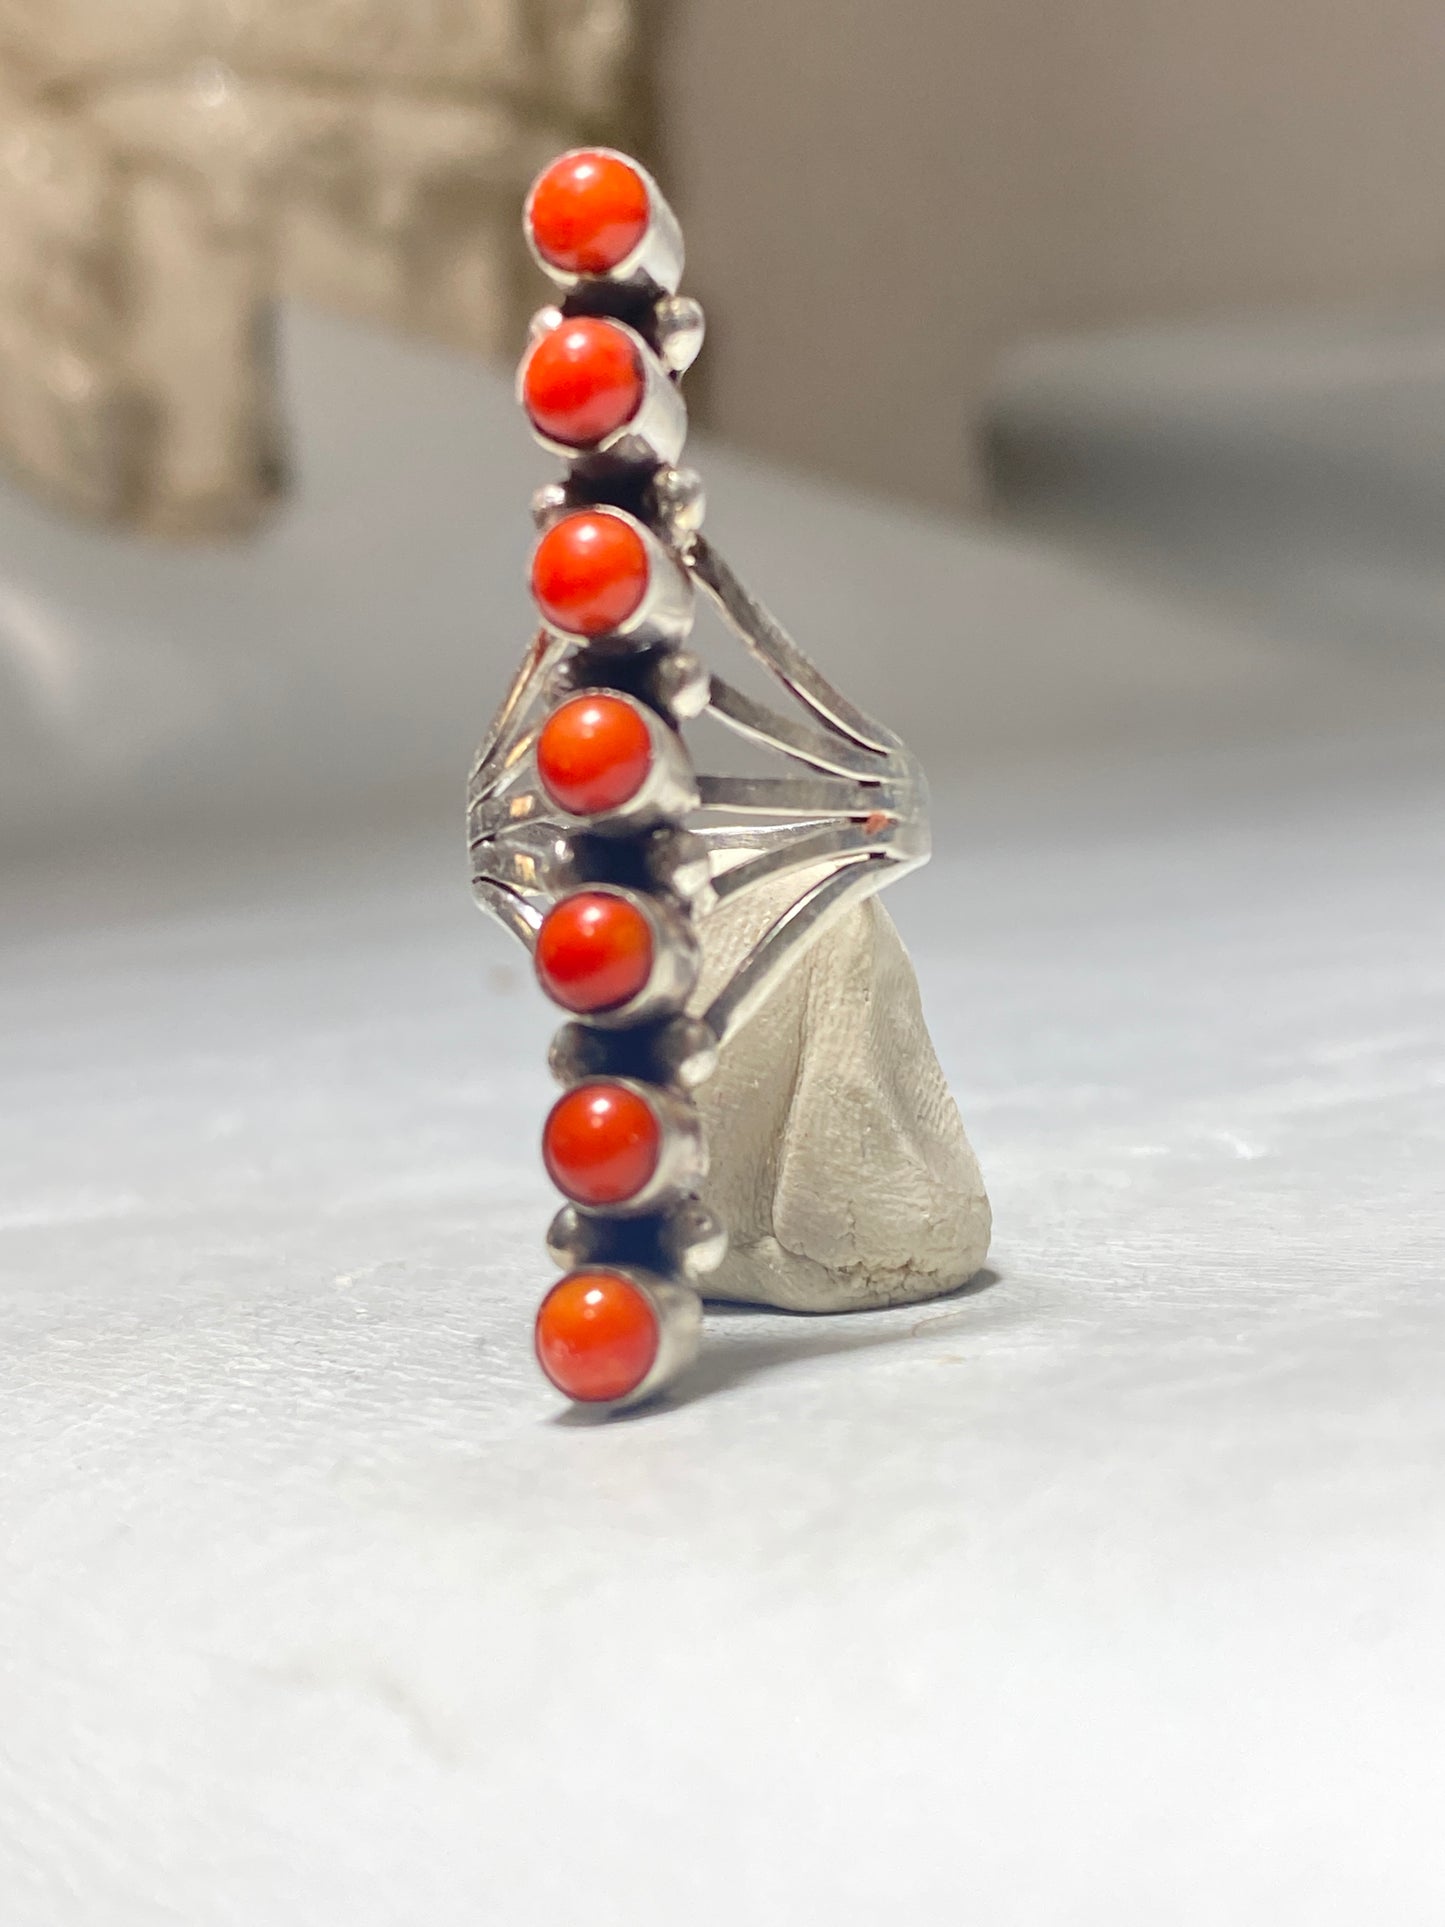 Coral ring size 7 long southwest sterling silver women